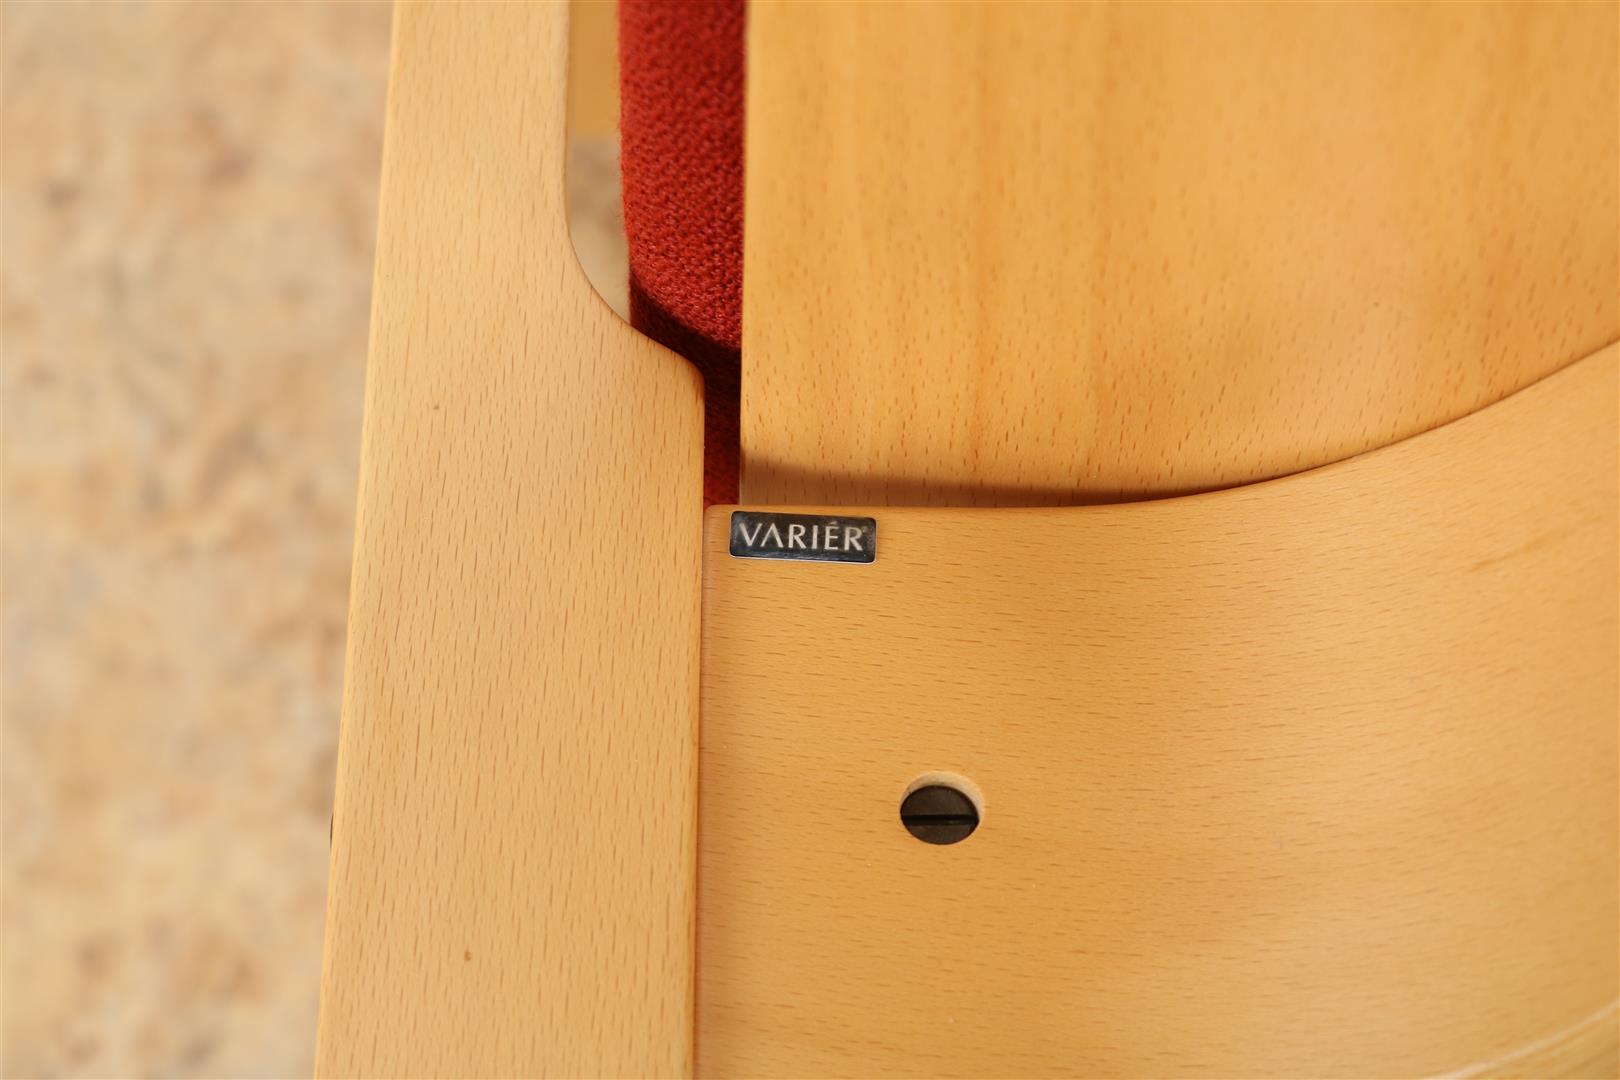 Beech wood balance chair with red upholstery, Peter Opsvik for Stokke Varier, model Aculum, Norway. - Image 4 of 5